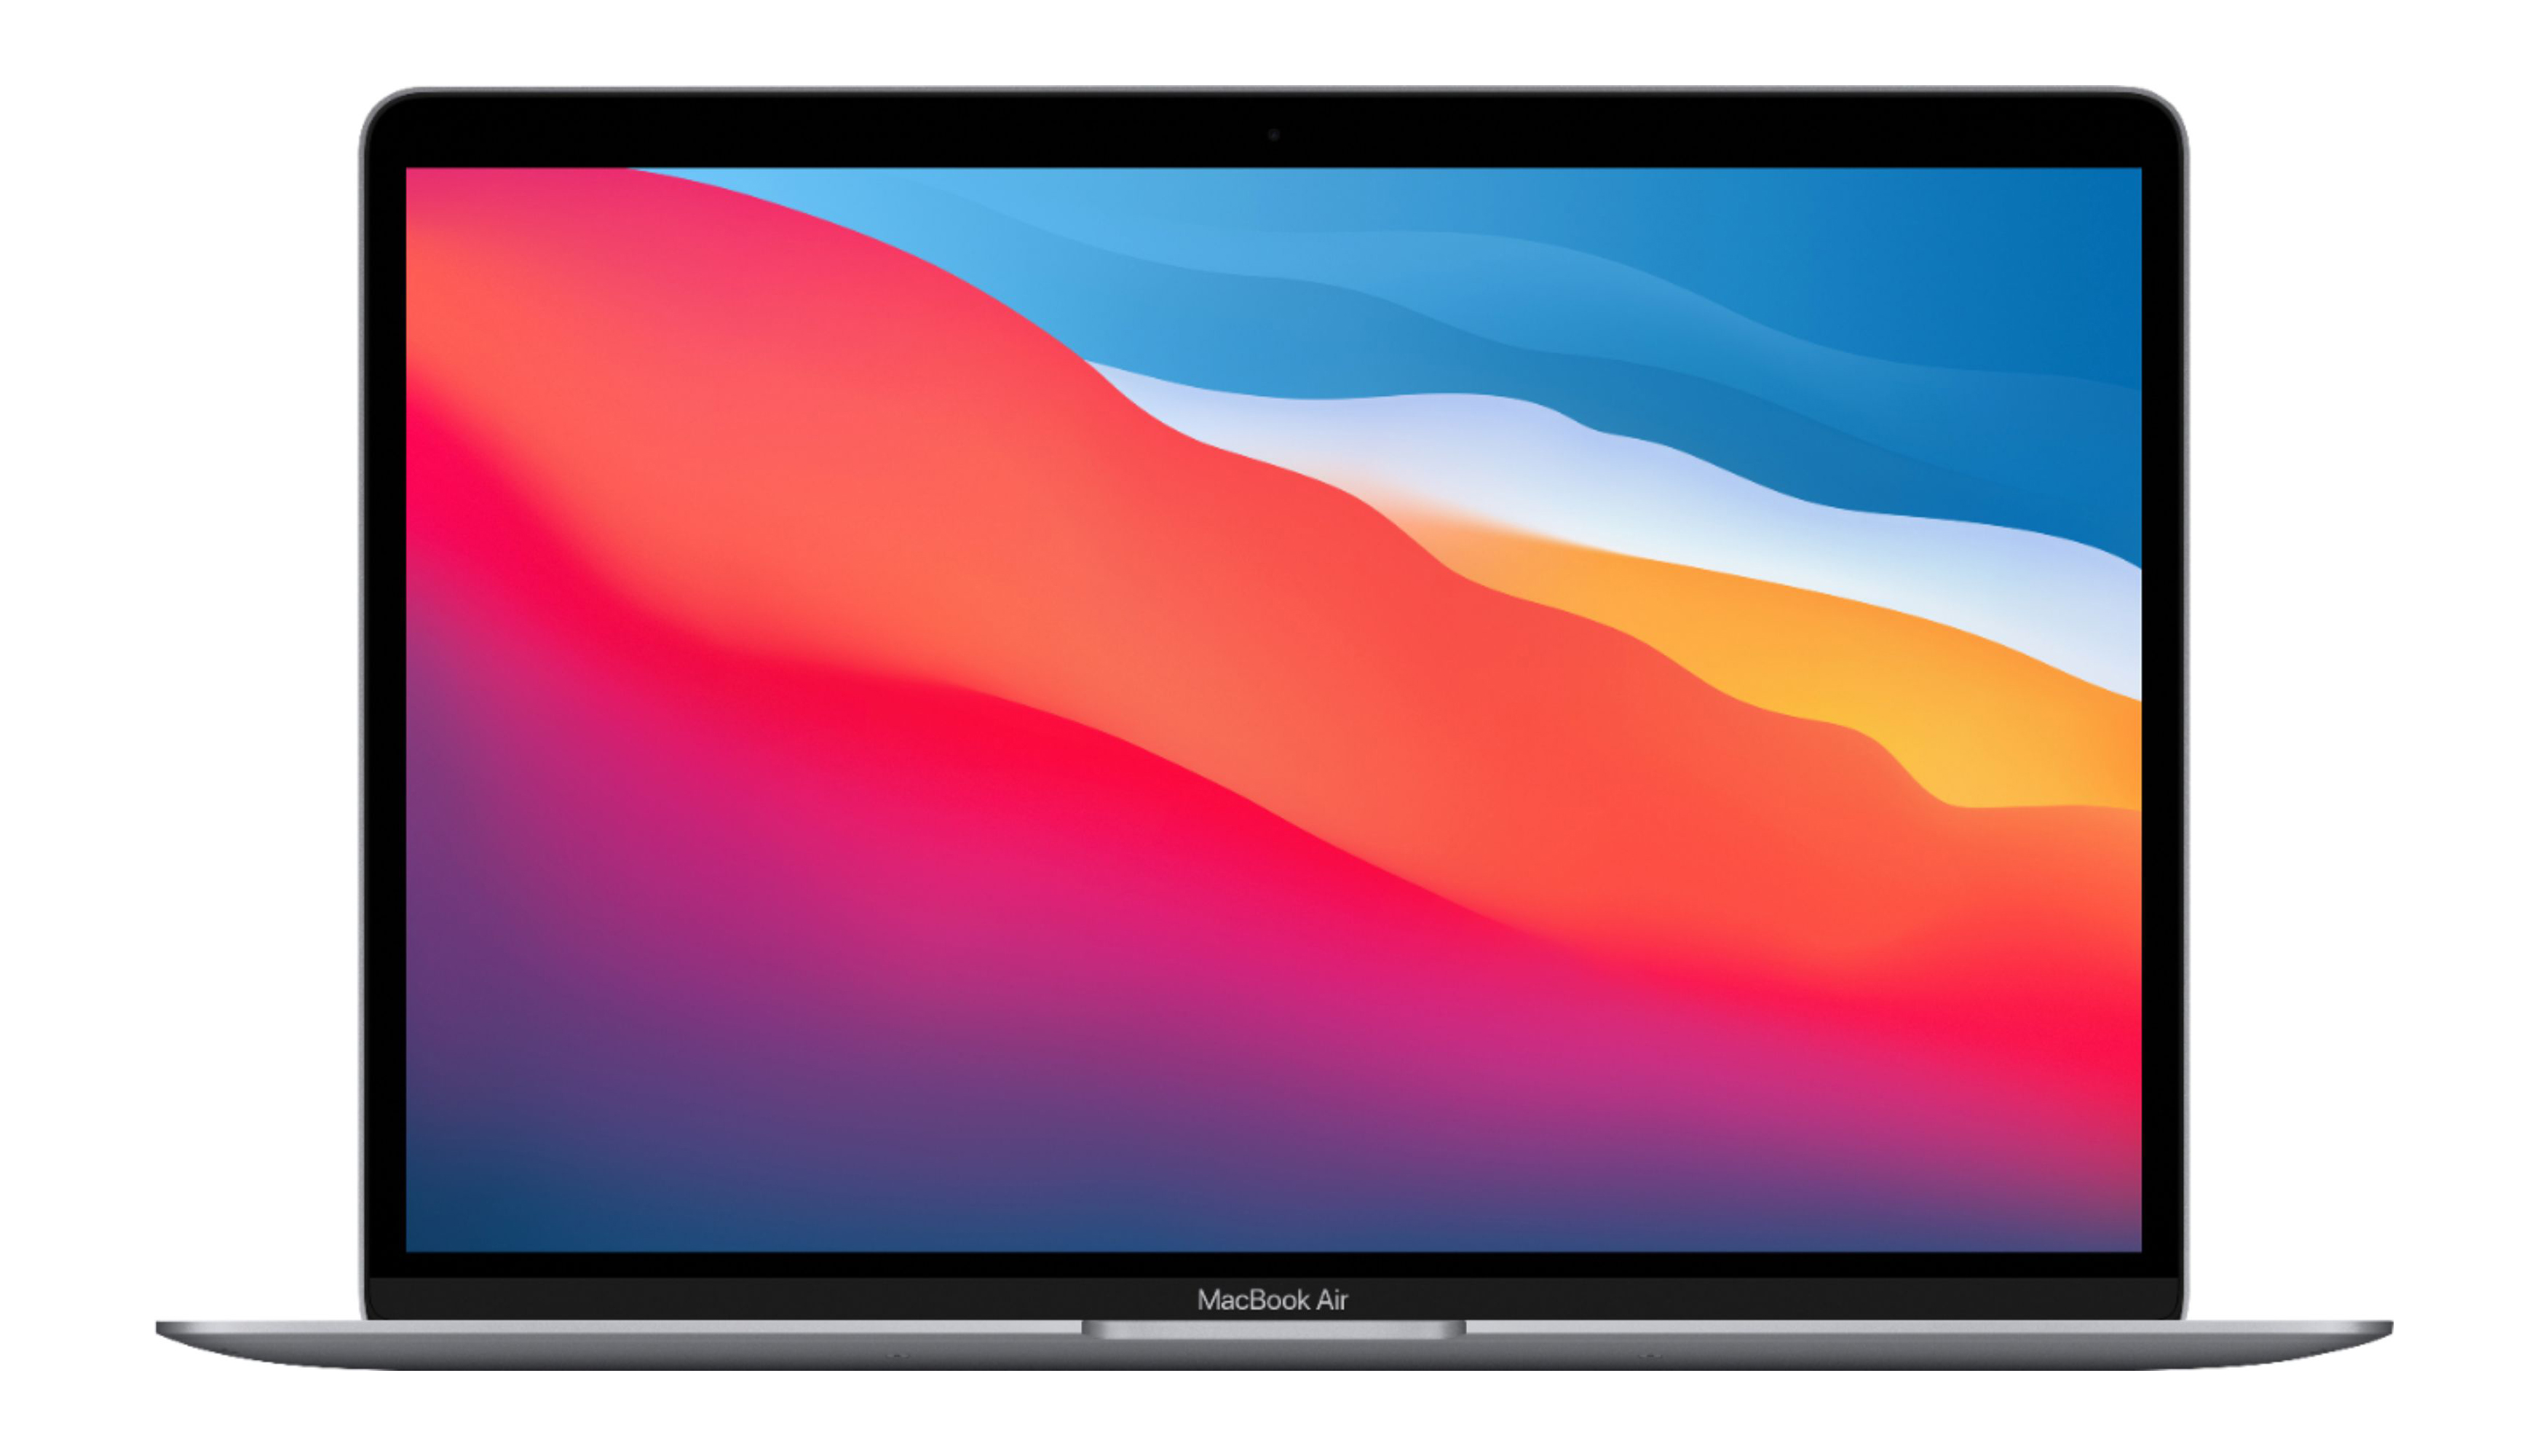 The MacBook Pro 13-inch (M1, 2020) keeps things small and lightweight.